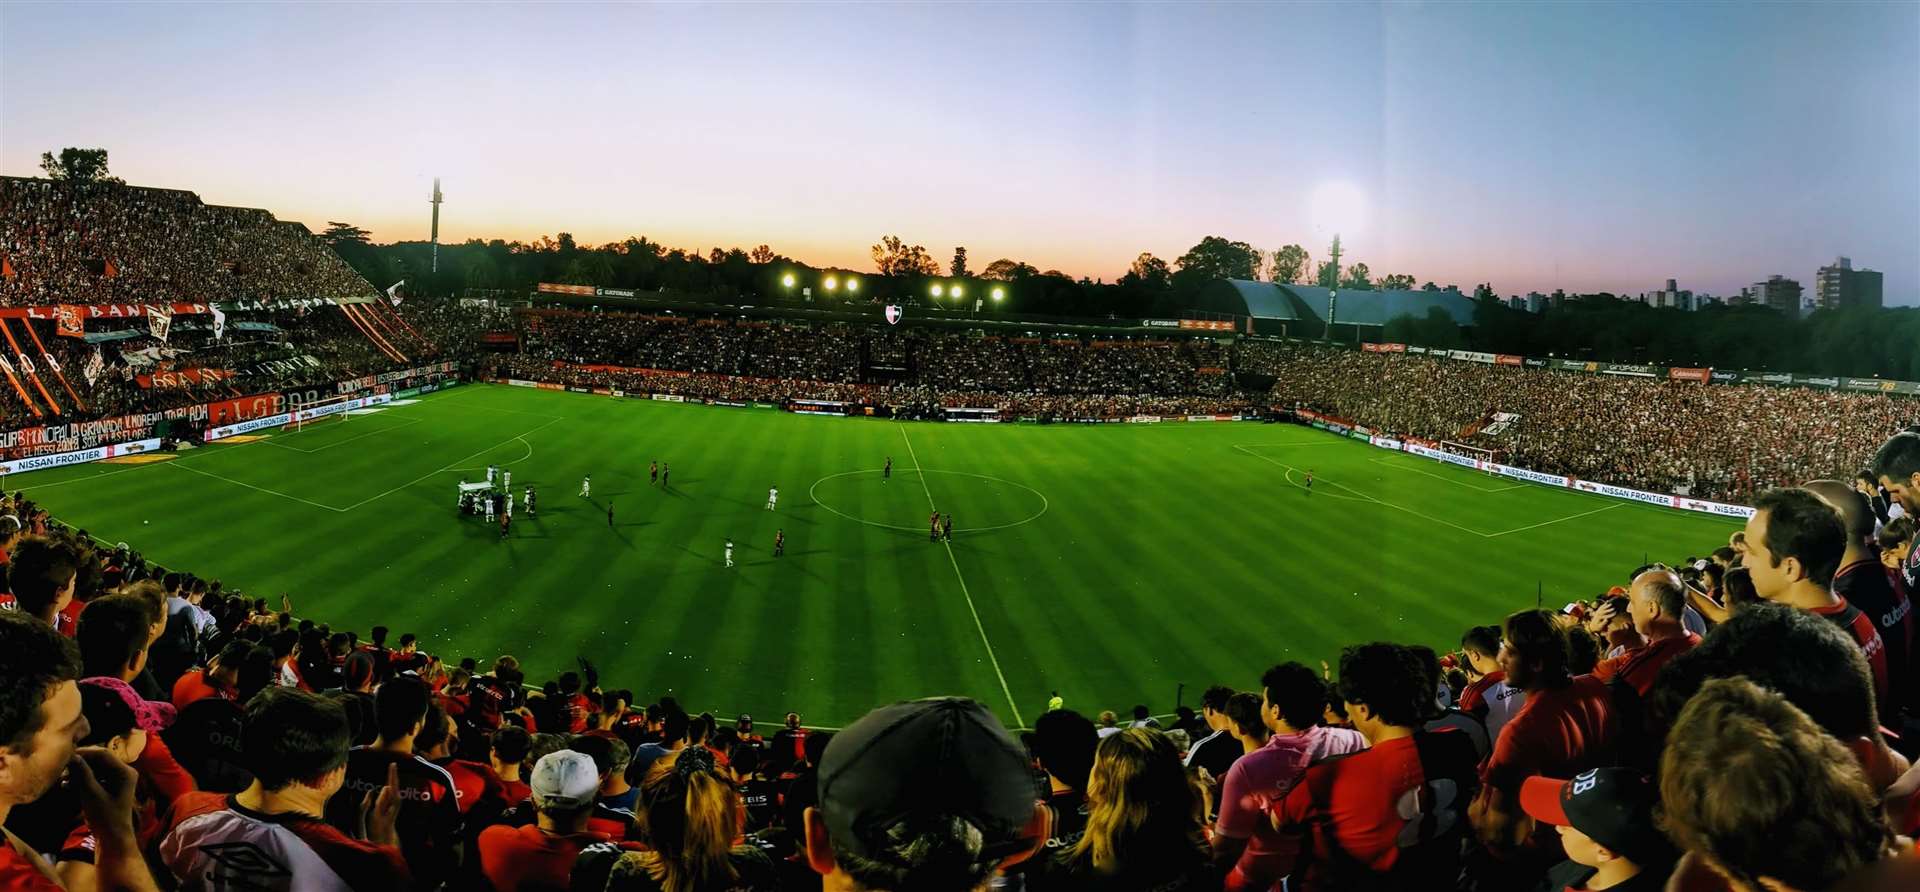 Matchday at Newell’s Old Boys’ El Coloso Marcelo Bielsa stadium in Rosario, Argentina. Picture: Jamie Ralph